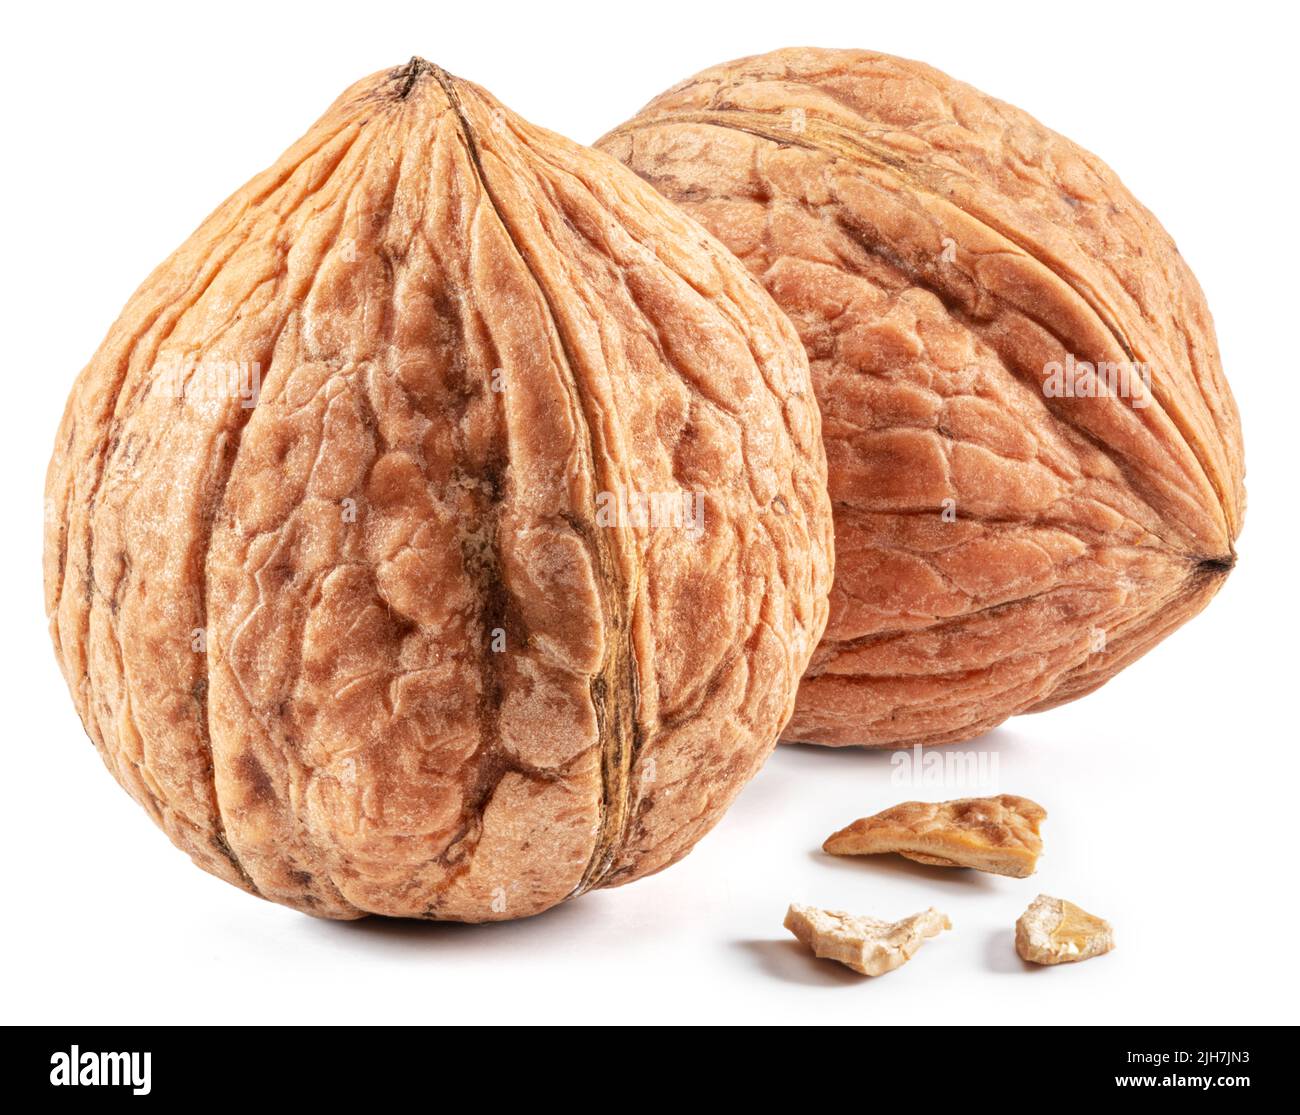 Two whole walnuts isolated on white background. Stock Photo